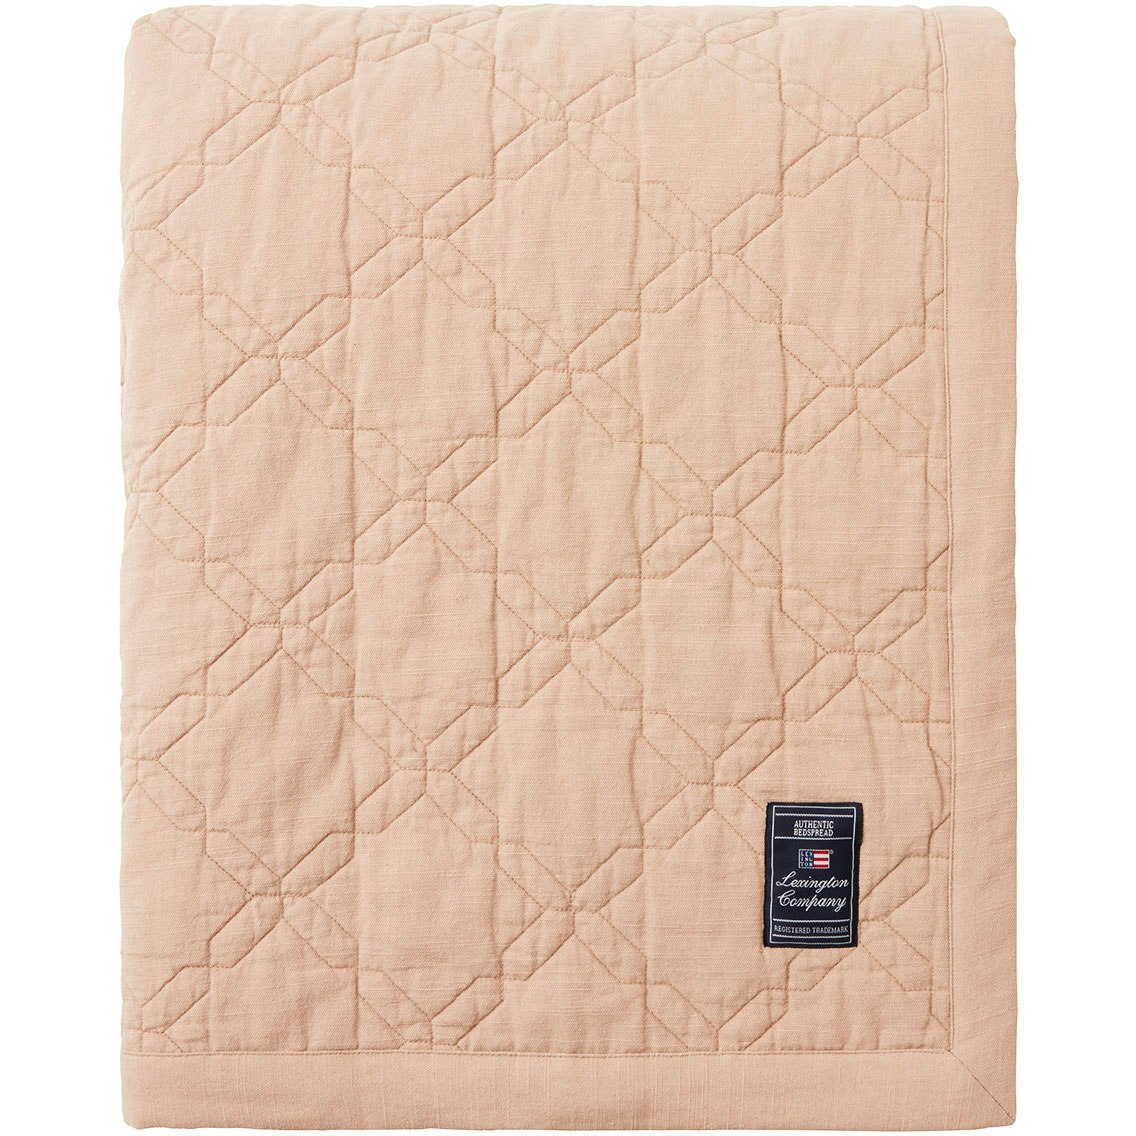 Lexington Quilted Recycled Cotton Sengeteppe 260x240 cm, Beige Bomull